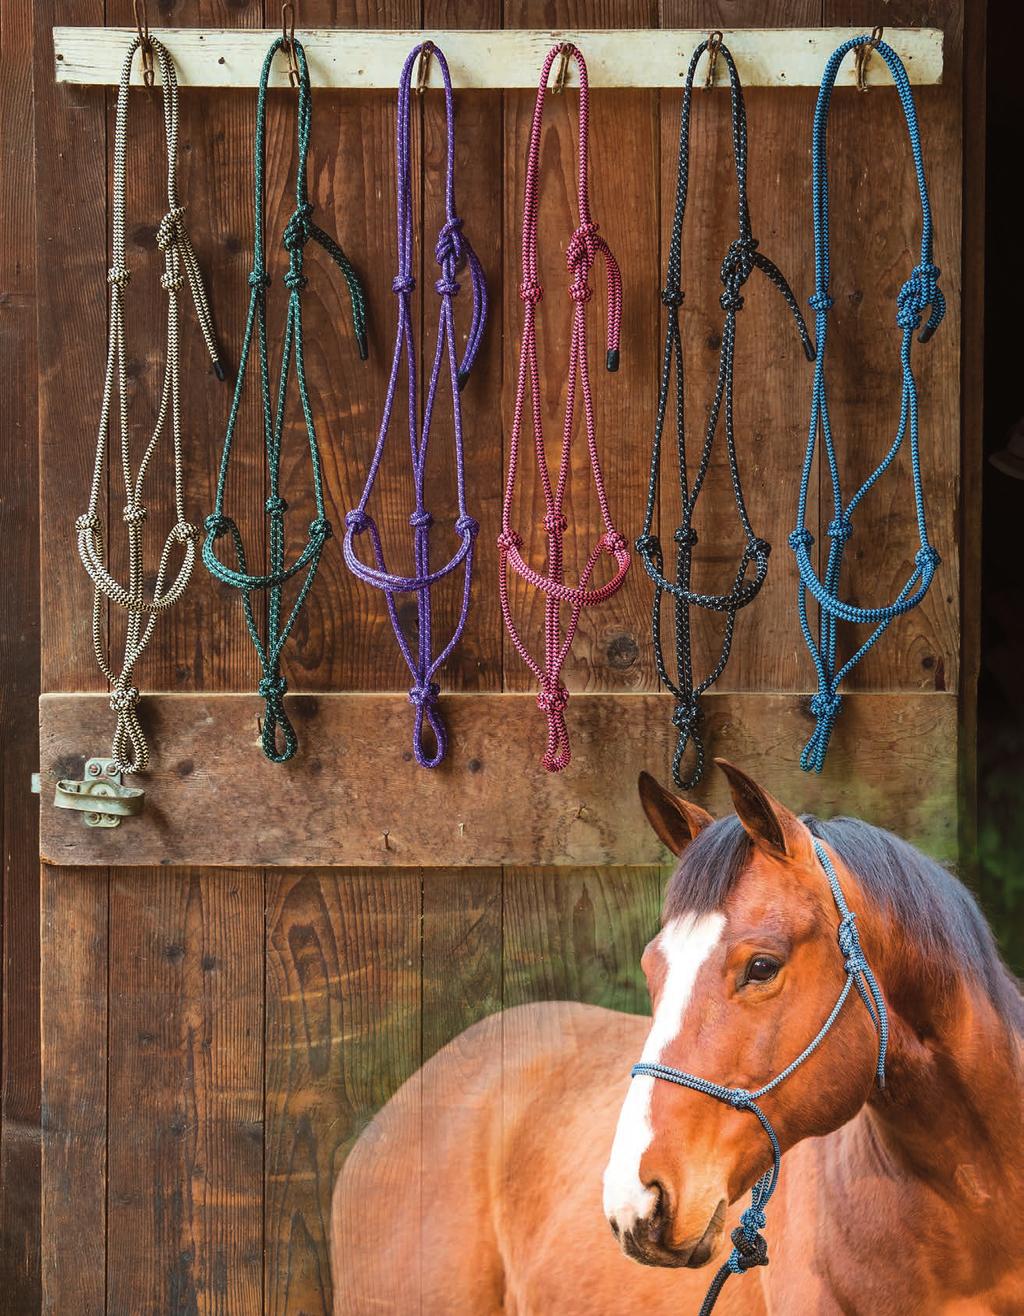 BY Hand-Tied with Pride in the USA W33 Tan/Black W35 Green/Silver W36 Purple/Silver W32 Pink/Black W37 Black/Silver W34 Blue/Black Big Sky Rope Halters This premium halter is specially-constructed